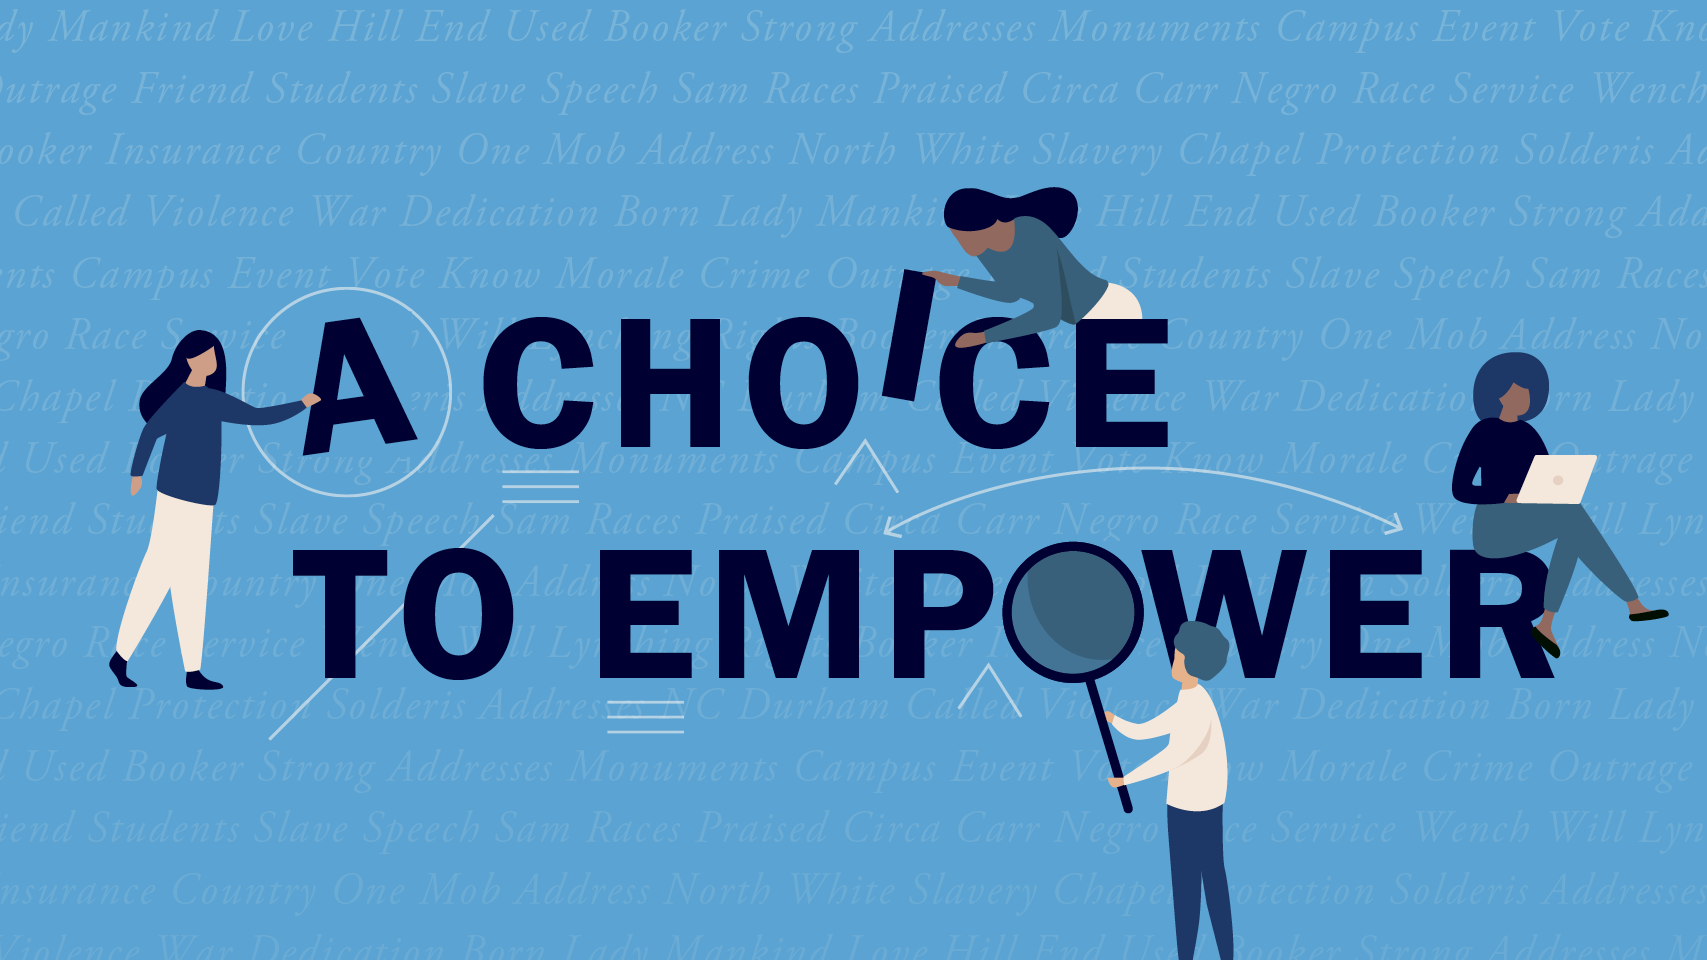 A choice to empower